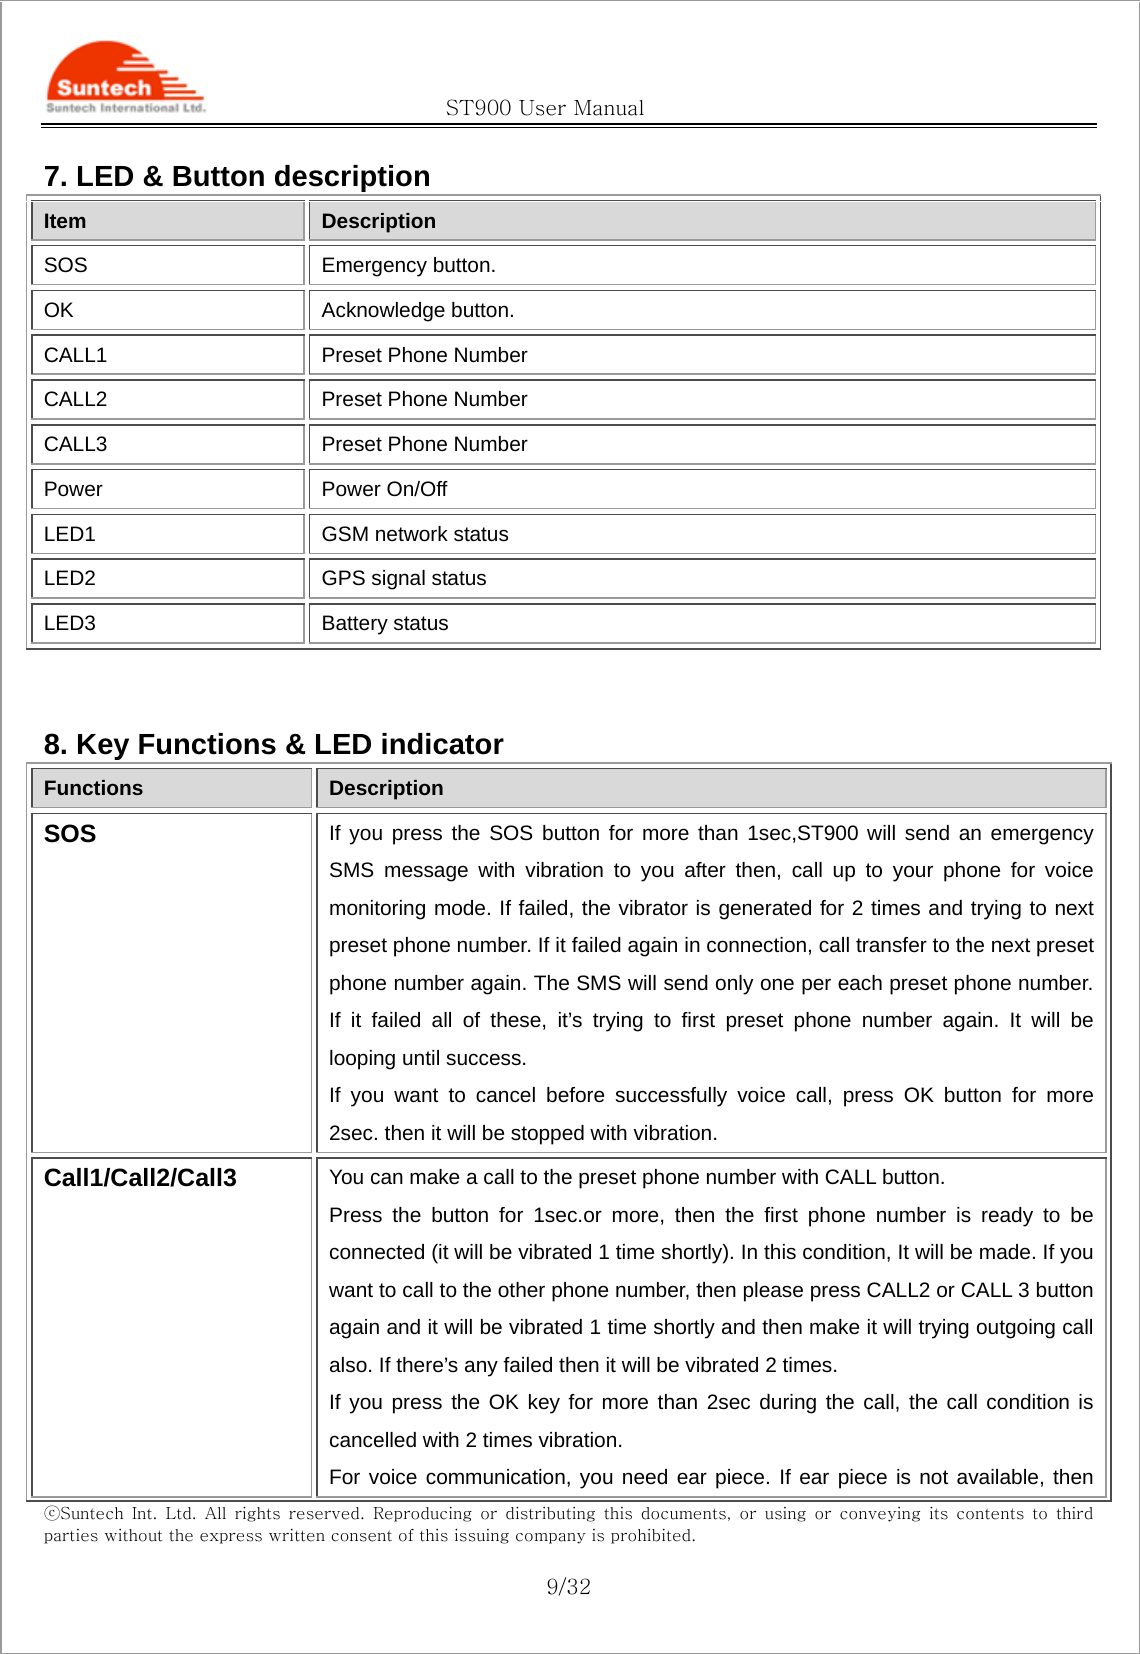                                               ST900 User Manual ⓒSuntech  Int.  Ltd.  All  rights  reserved.  Reproducing  or  distributing this documents, or using or conveying its contents to third parties without the express written consent of this issuing company is prohibited.  9/32 7. LED &amp; Button description   Item  Description SOS Emergency button. OK Acknowledge button. CALL1  Preset Phone Number CALL2  Preset Phone Number CALL3  Preset Phone Number Power Power On/Off LED1  GSM network status LED2 GPS signal status LED3 Battery status   8. Key Functions &amp; LED indicator Functions  Description SOS  If you press the SOS button for more than 1sec,ST900 will send an emergency SMS message with vibration to you after then, call up to your phone for voice monitoring mode. If failed, the vibrator is generated for 2 times and trying to next preset phone number. If it failed again in connection, call transfer to the next preset phone number again. The SMS will send only one per each preset phone number. If it failed all of these, it’s trying to first preset phone number again. It will be looping until success. If you want to cancel before successfully voice call, press OK button for more 2sec. then it will be stopped with vibration.   Call1/Call2/Call3  You can make a call to the preset phone number with CALL button. Press the button for 1sec.or more, then the first phone number is ready to be connected (it will be vibrated 1 time shortly). In this condition, It will be made. If you want to call to the other phone number, then please press CALL2 or CALL 3 button again and it will be vibrated 1 time shortly and then make it will trying outgoing call also. If there’s any failed then it will be vibrated 2 times. If you press the OK key for more than 2sec during the call, the call condition is cancelled with 2 times vibration.   For voice communication, you need ear piece. If ear piece is not available, then 